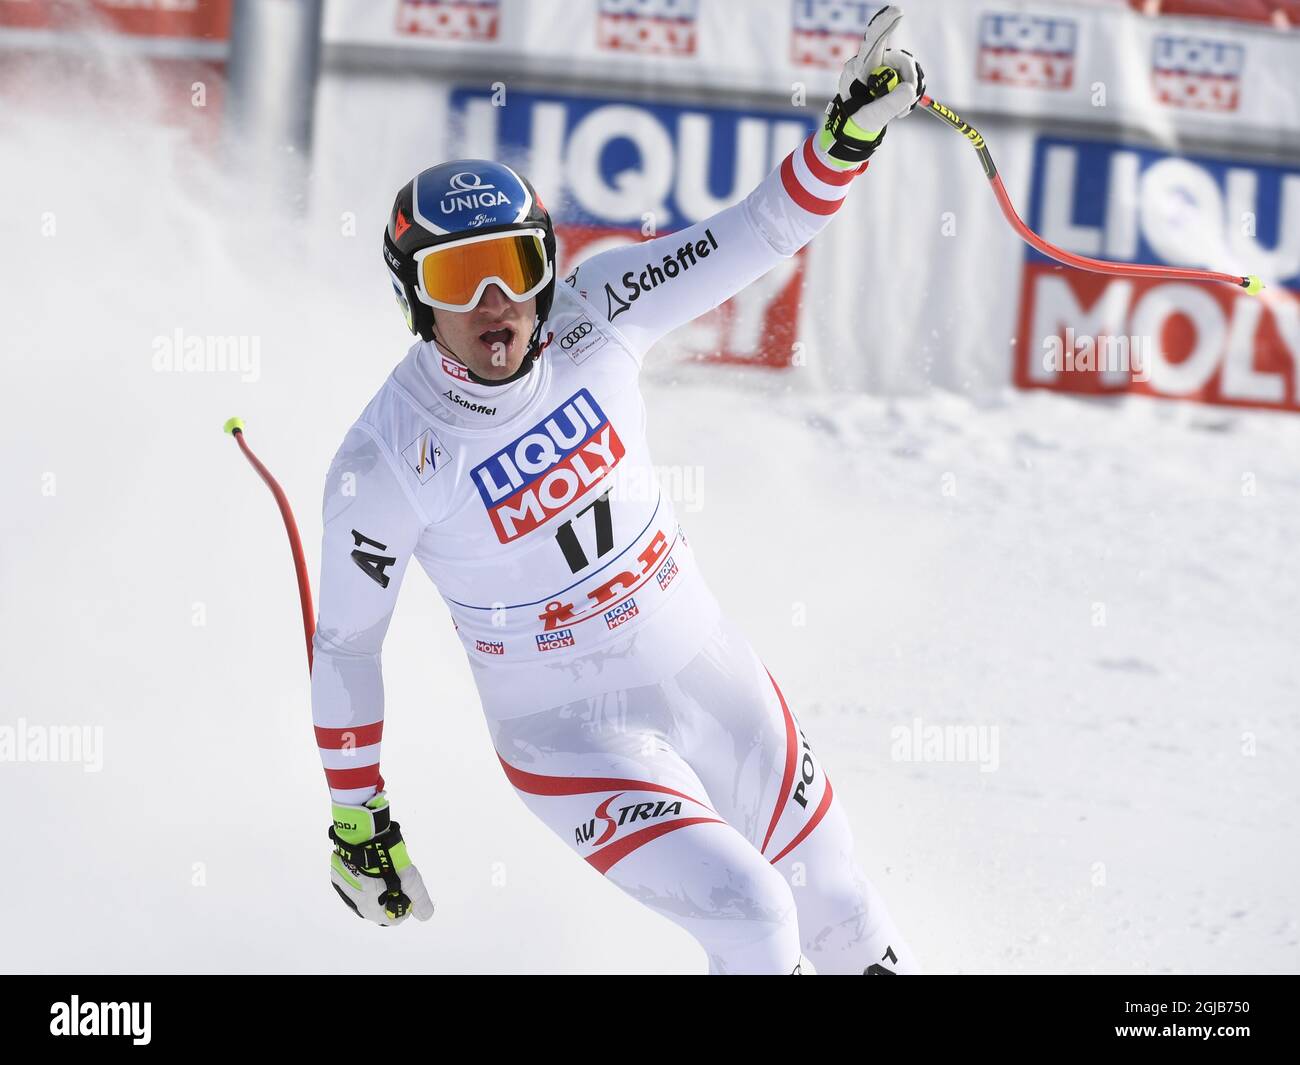 Matthias Mayer of Austria reacts after his race at the FIS Downhill World  Cup men's final in Are, Sweden, on March 14, 2018. Photo: Anders Wiklund /  TT 10040 Stock Photo - Alamy